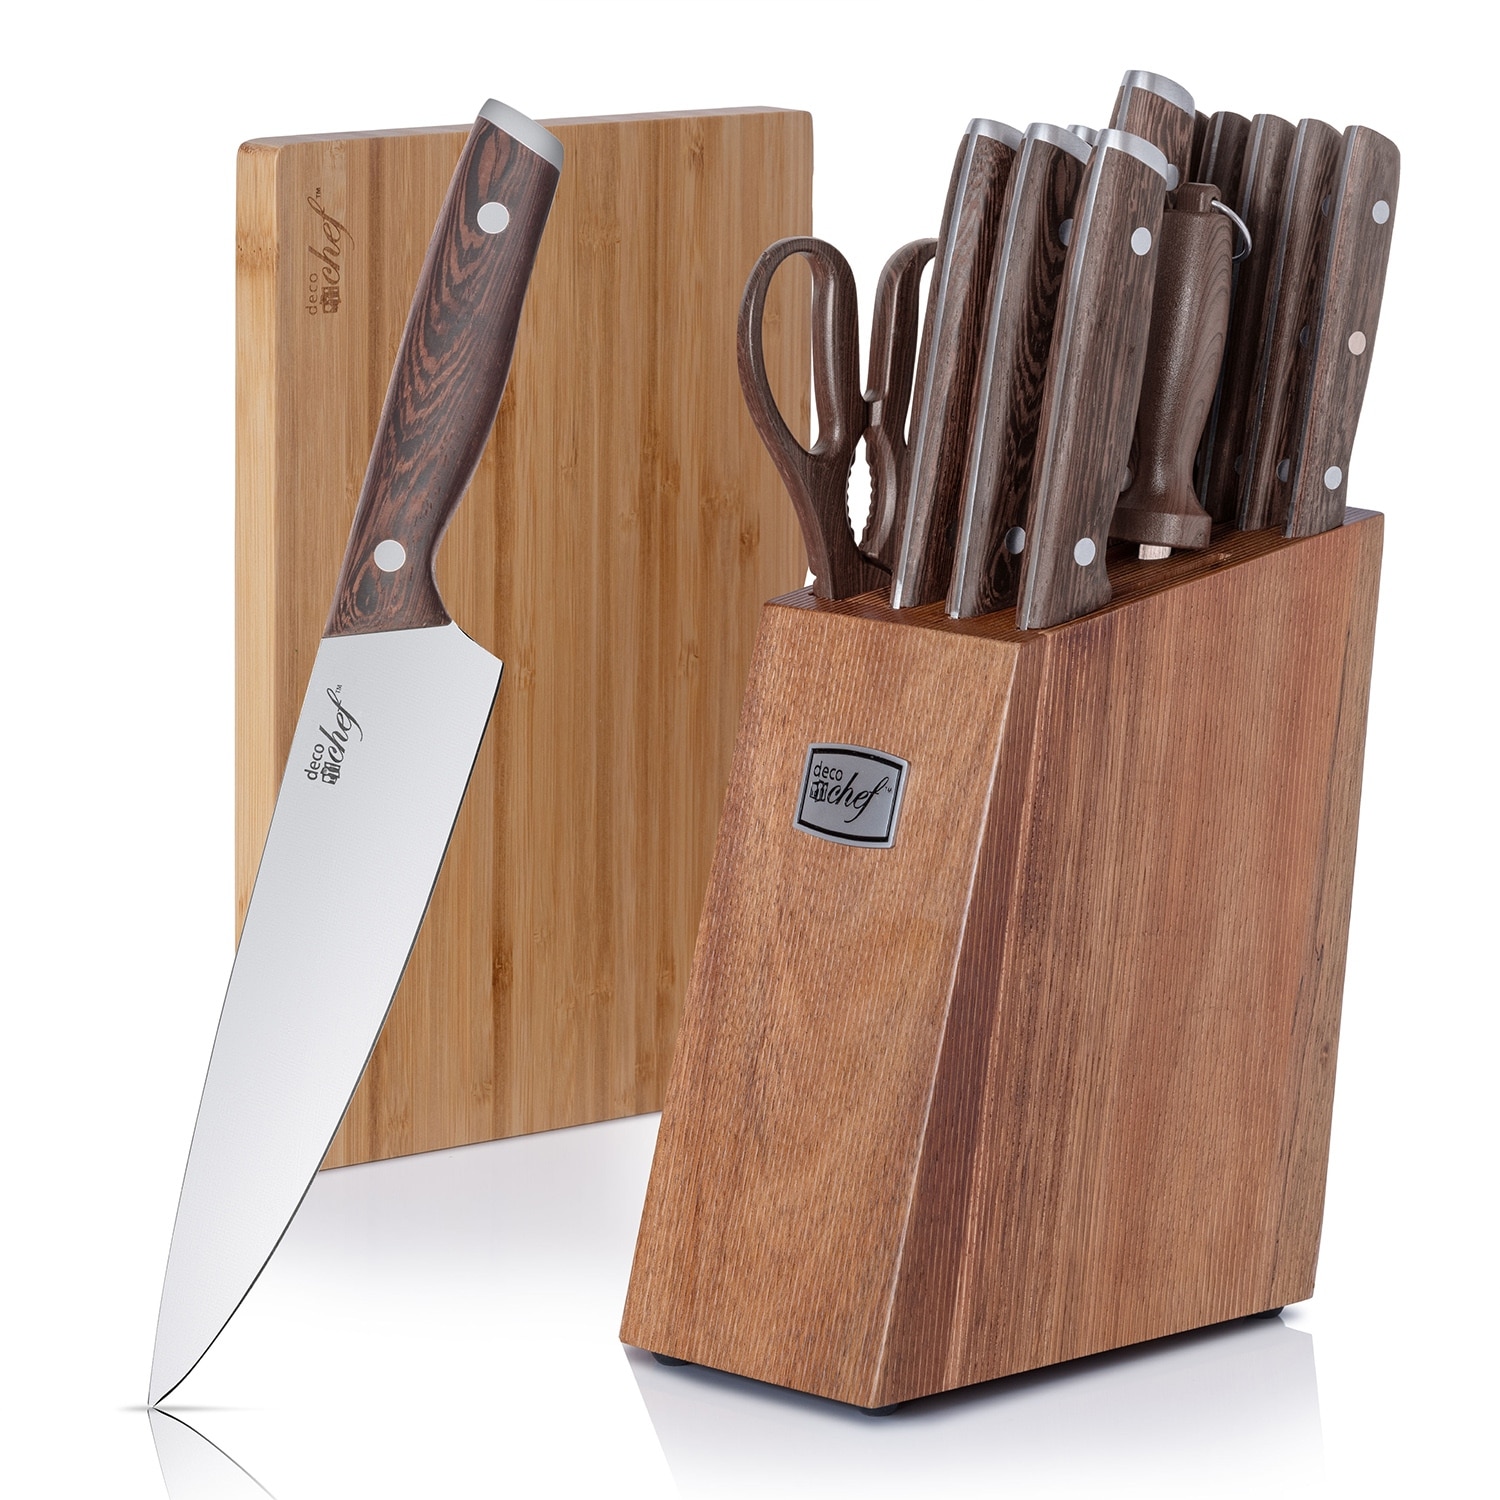 https://ak1.ostkcdn.com/images/products/is/images/direct/90e760f3c9eb6d92d65d9b73deb8b3c2d245ea8c/Deco-Chef-16-Piece-Kitchen-Knife-Set-with-Wedge-Handles%2C-Shears%2C-Block%2C-and-Cutting-Board.jpg